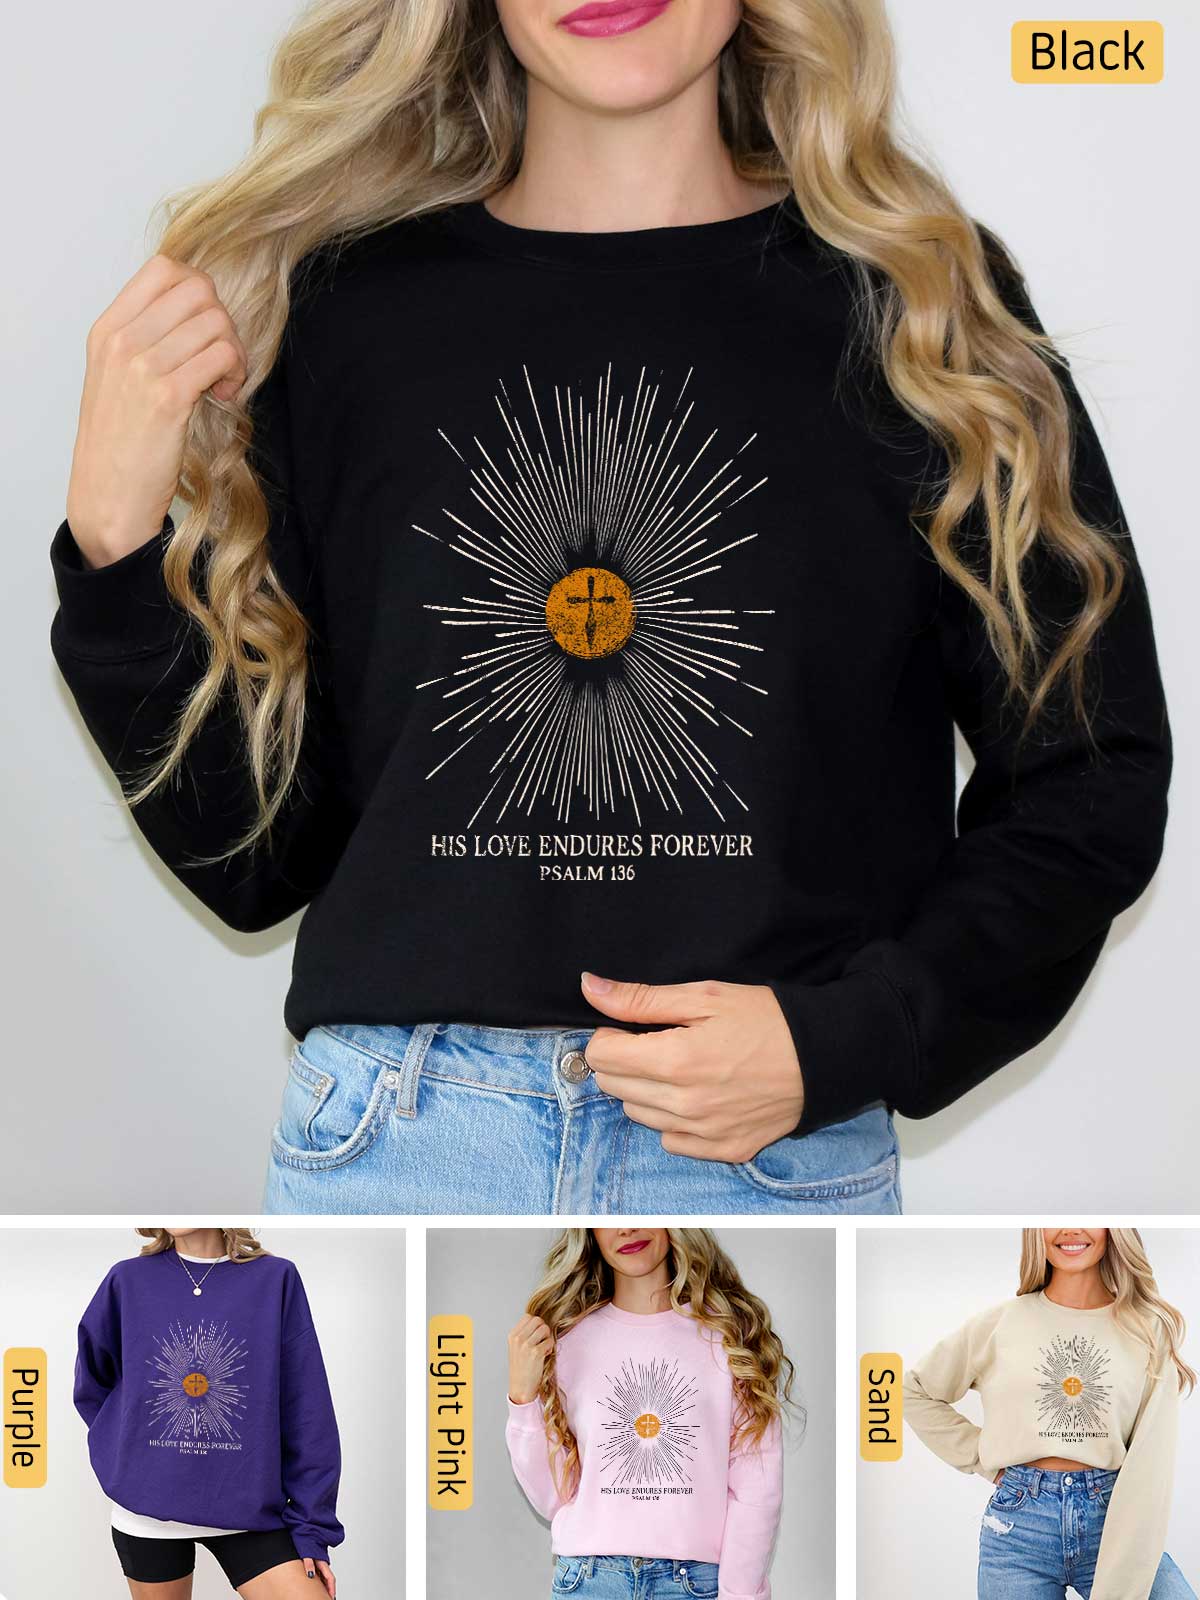 a woman wearing a black sweatshirt with a sun graphic on it